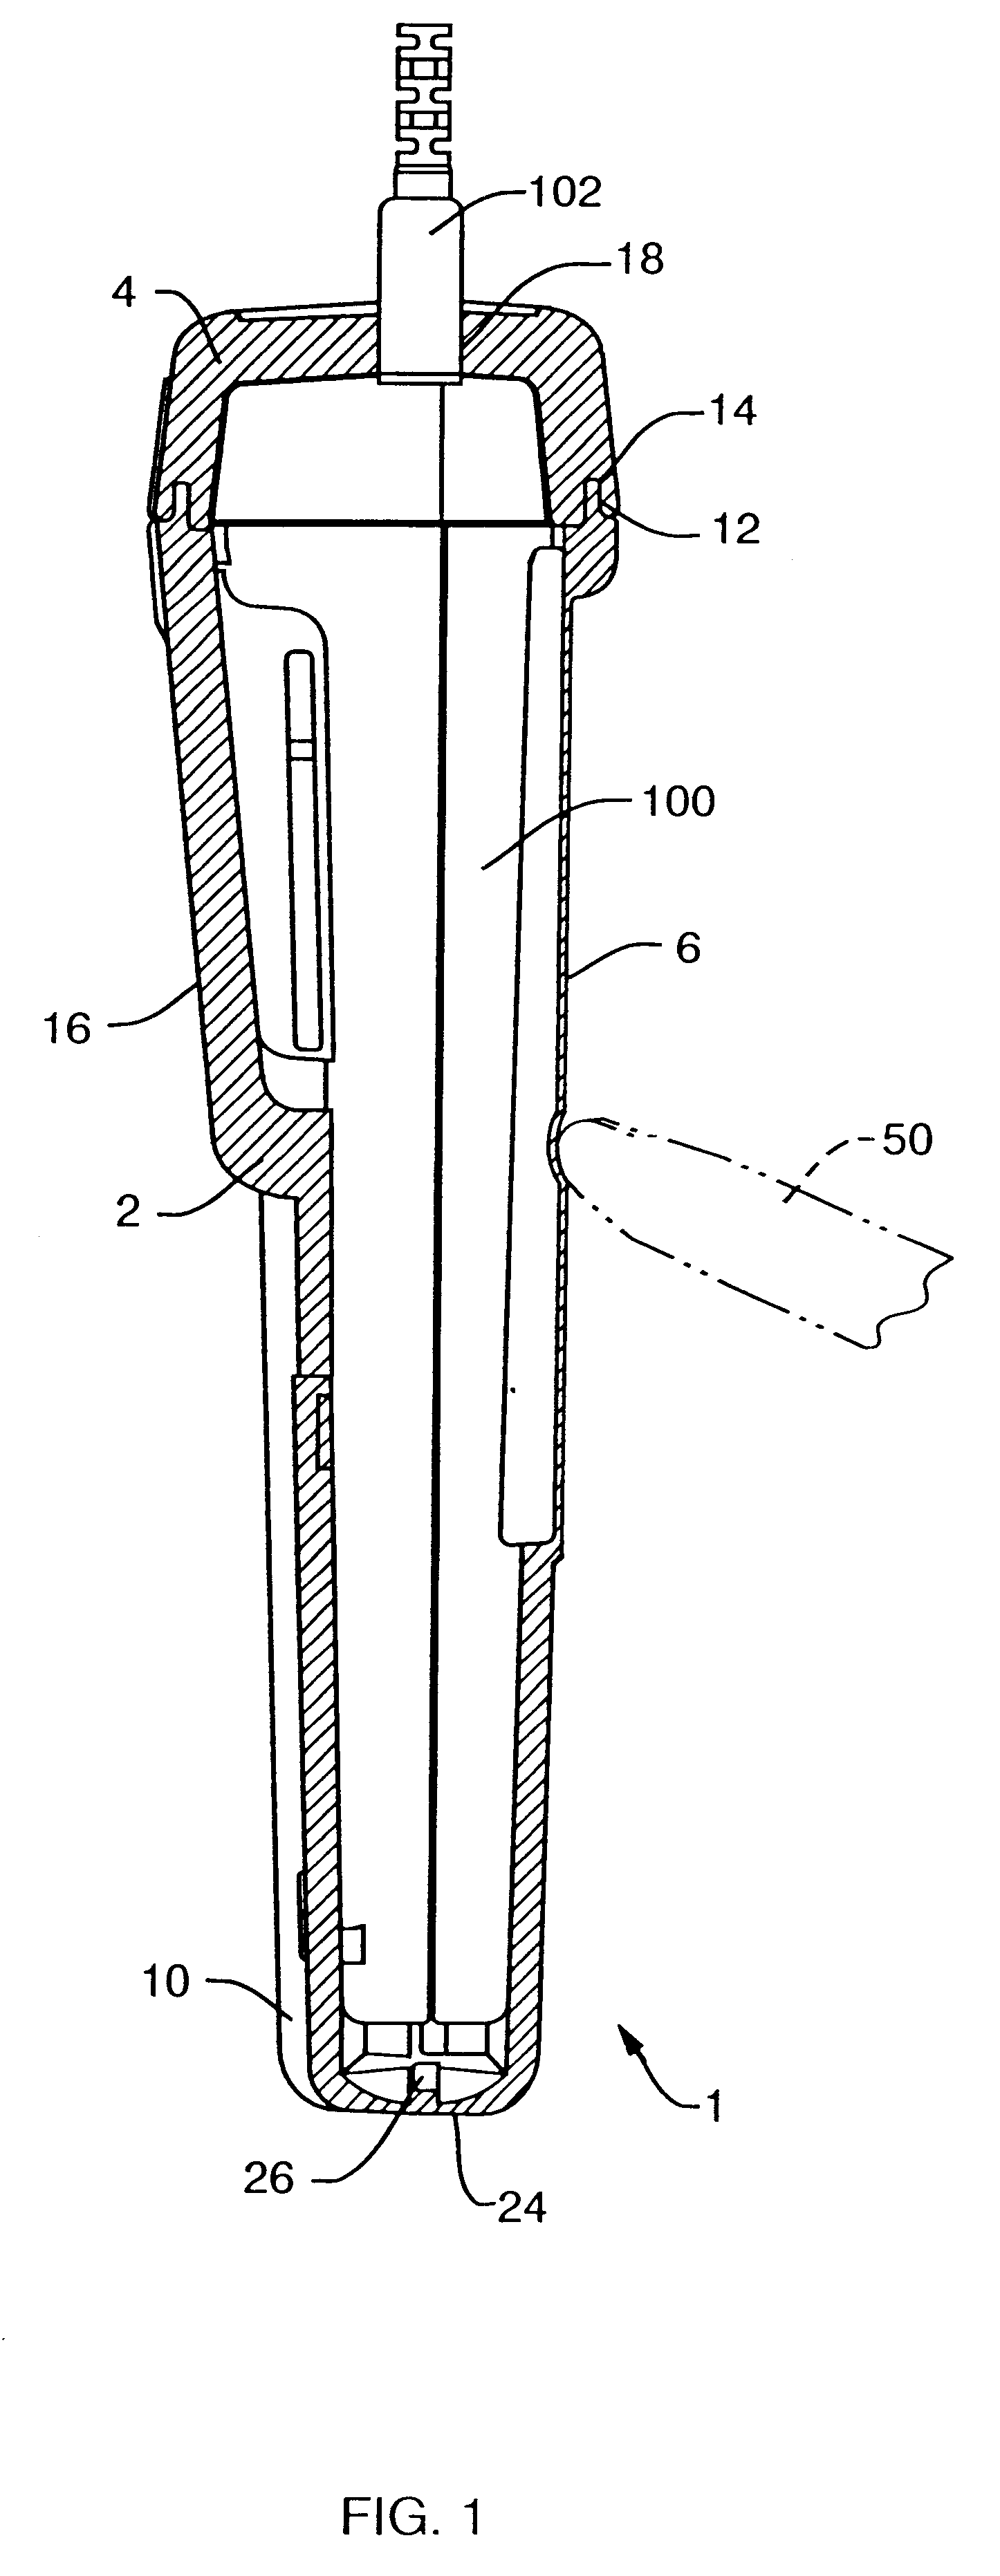 Watertight protective device for holding a measuring or display device